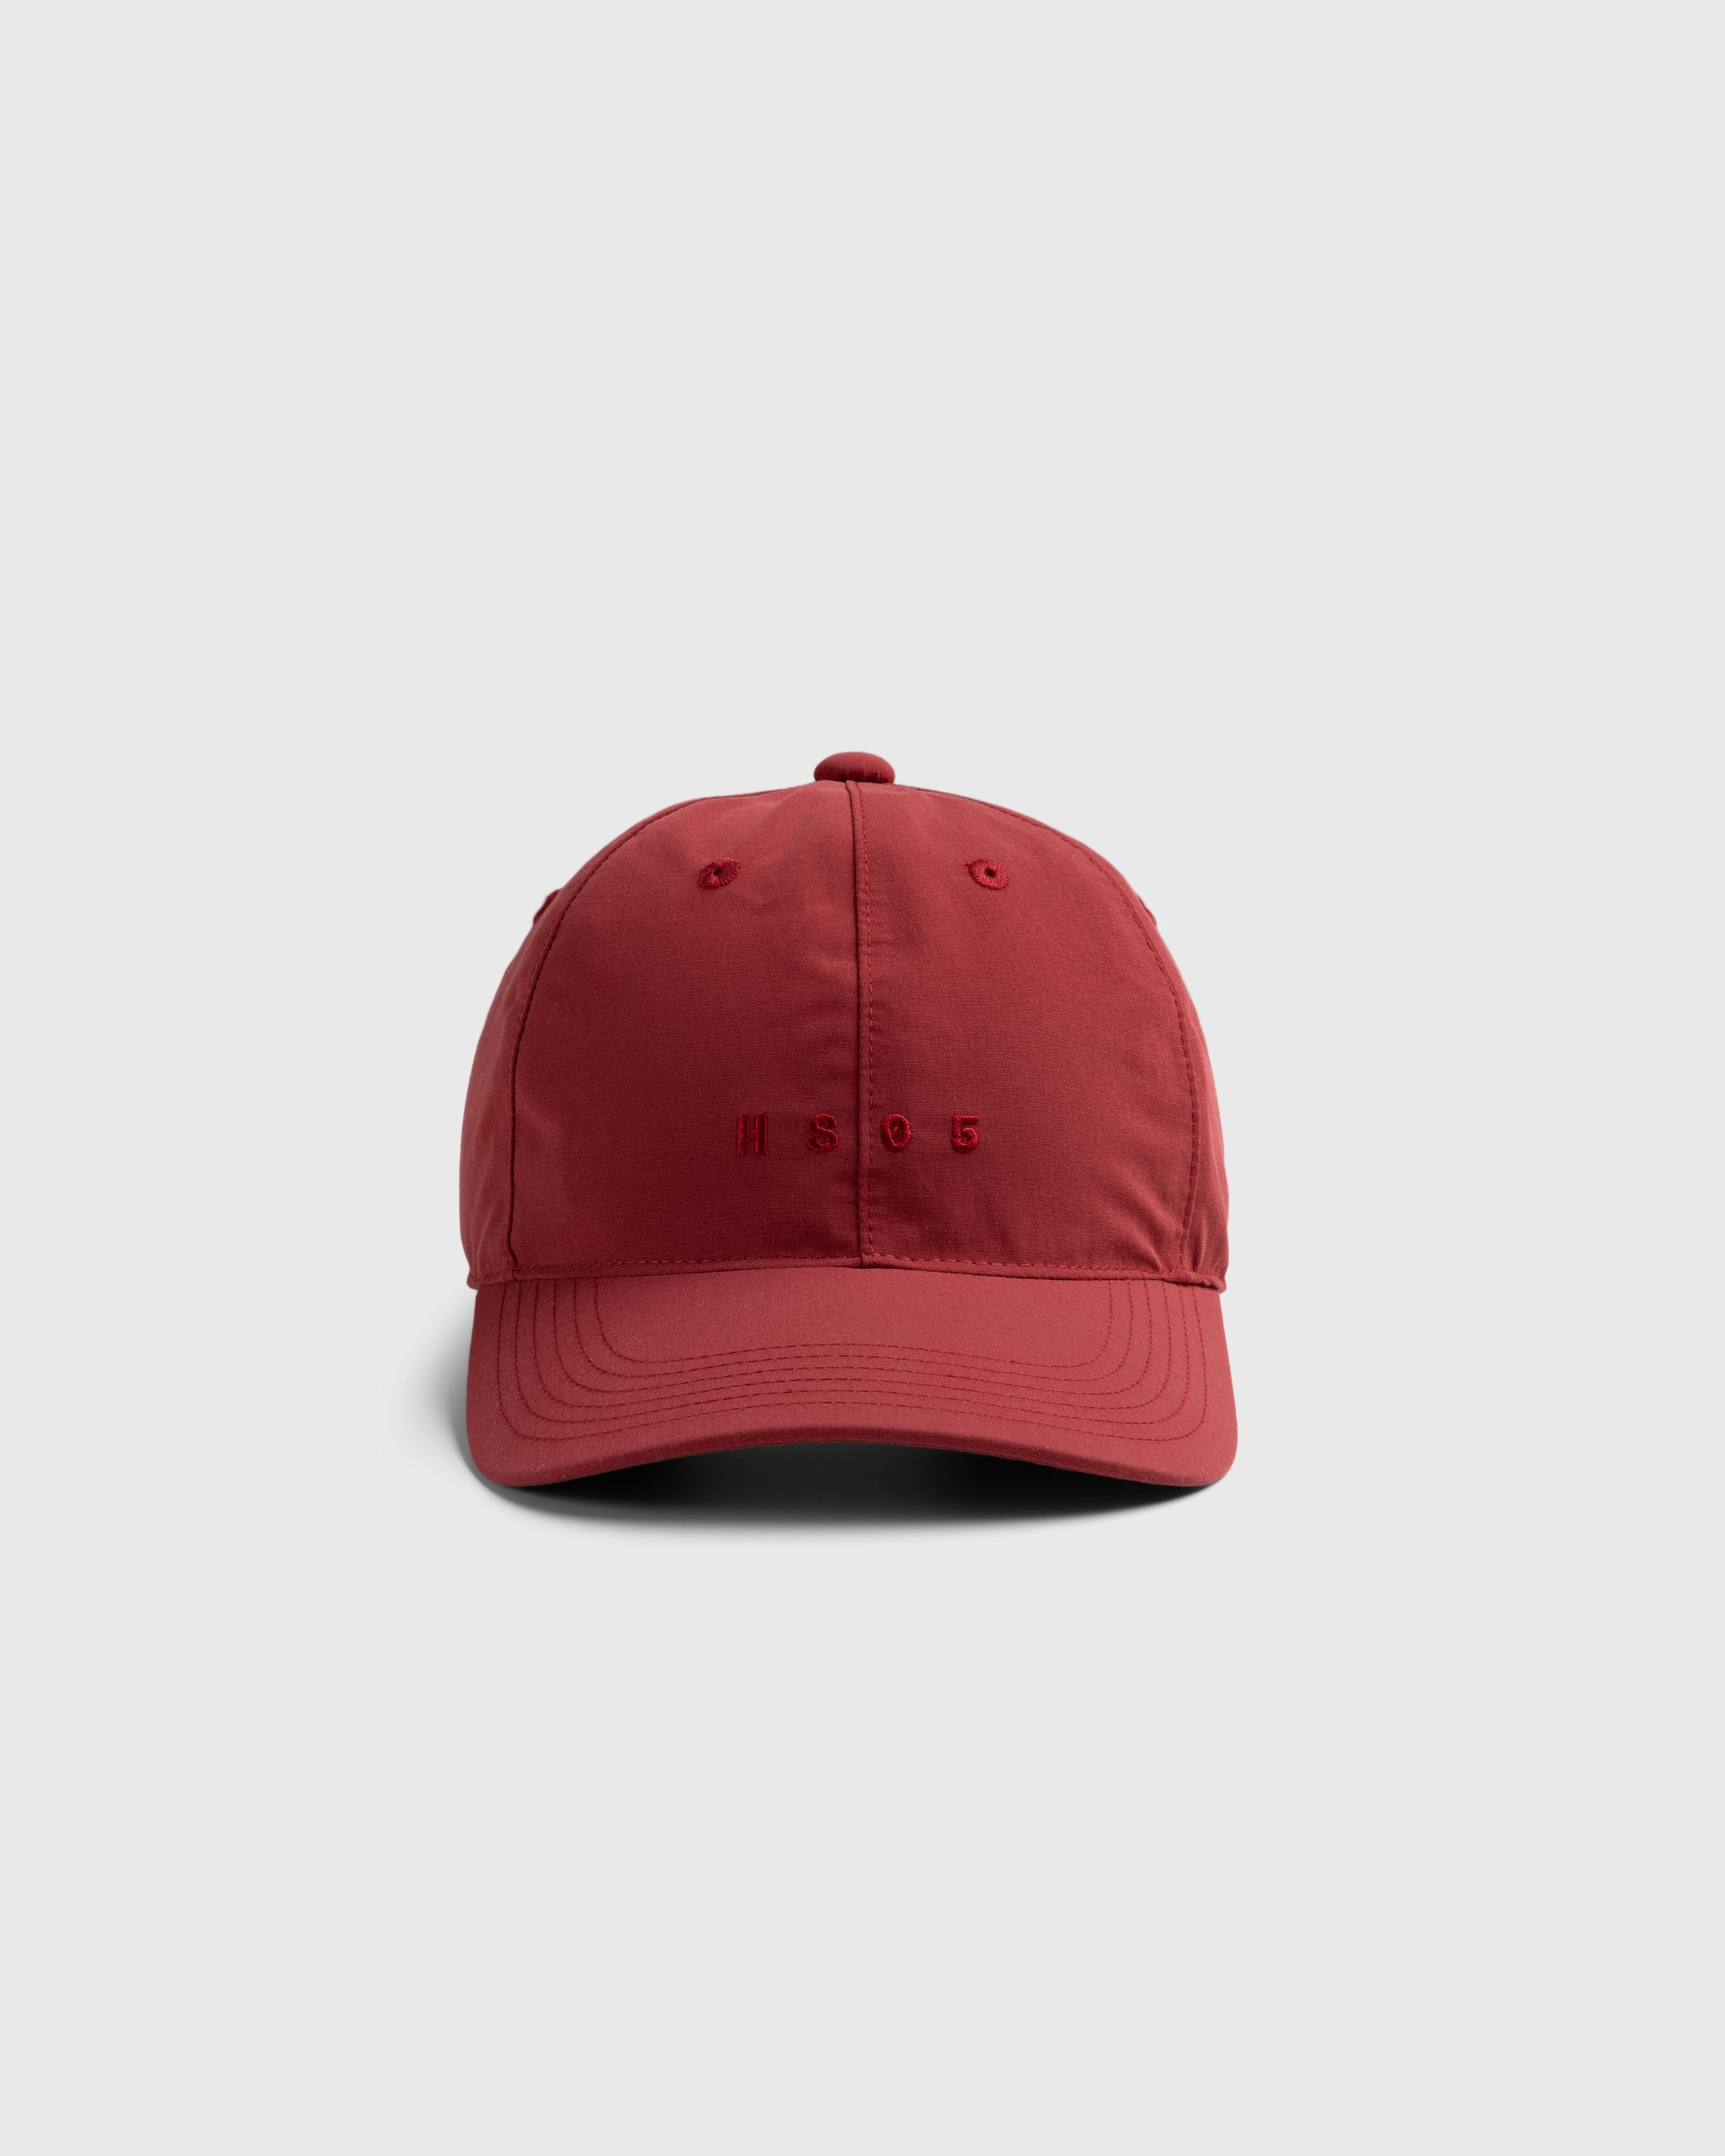 Highsnobiety HS05 – 3 Layer Taped Nylon Cap Red - Hats - Red - Image 3